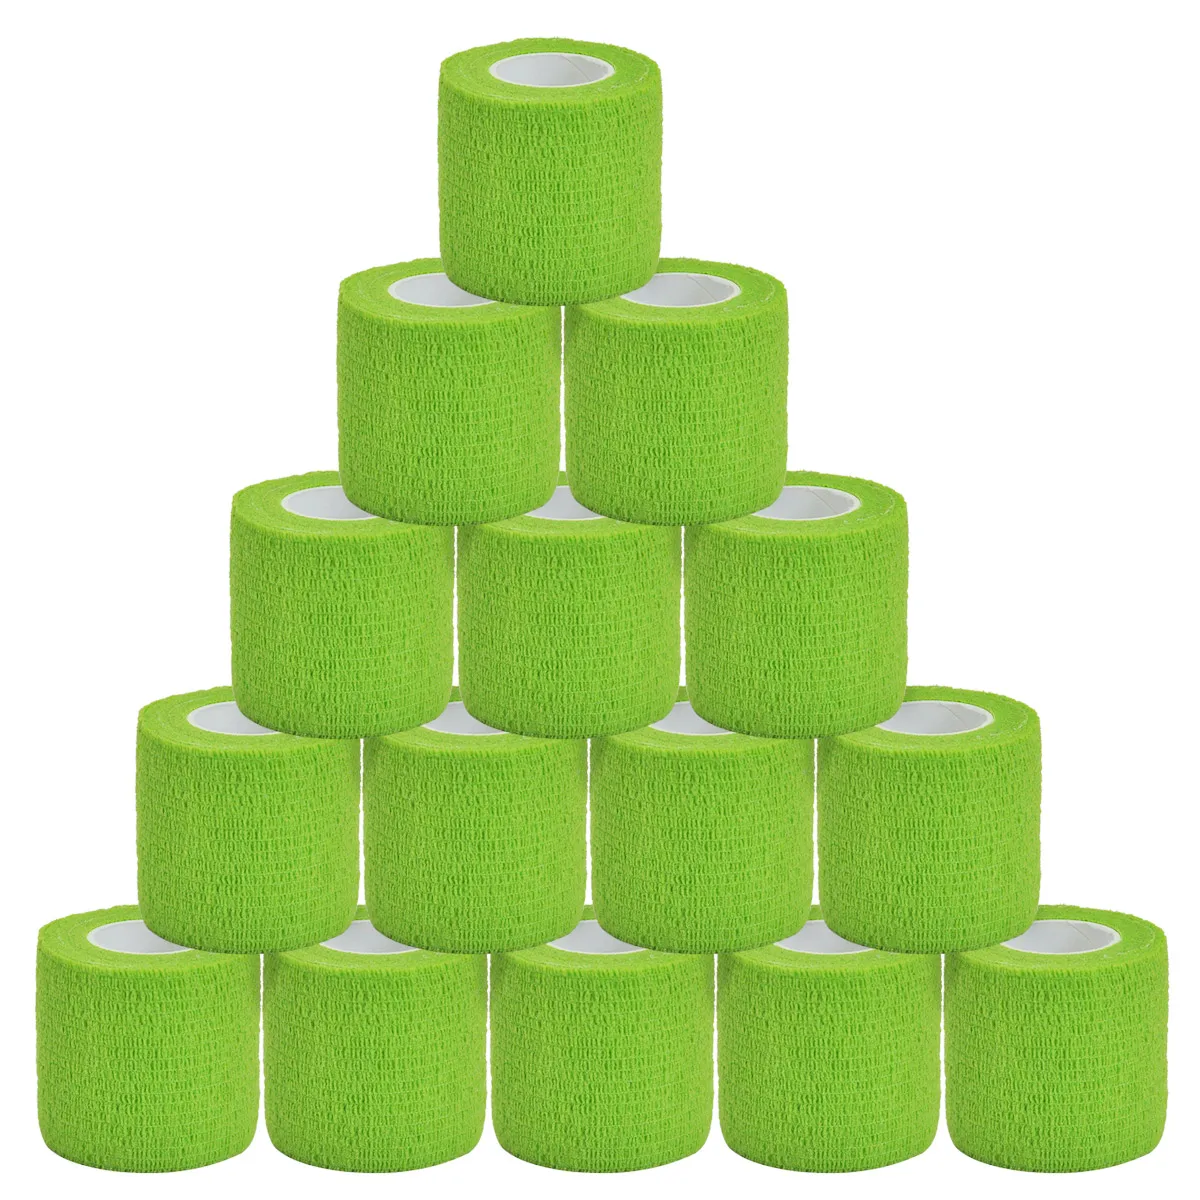 grass green sports Elastic Tattoo Grip Bandage Wraps Tapes Nonwoven Waterproof Self Adhesive Finger Protection TattooAccessories